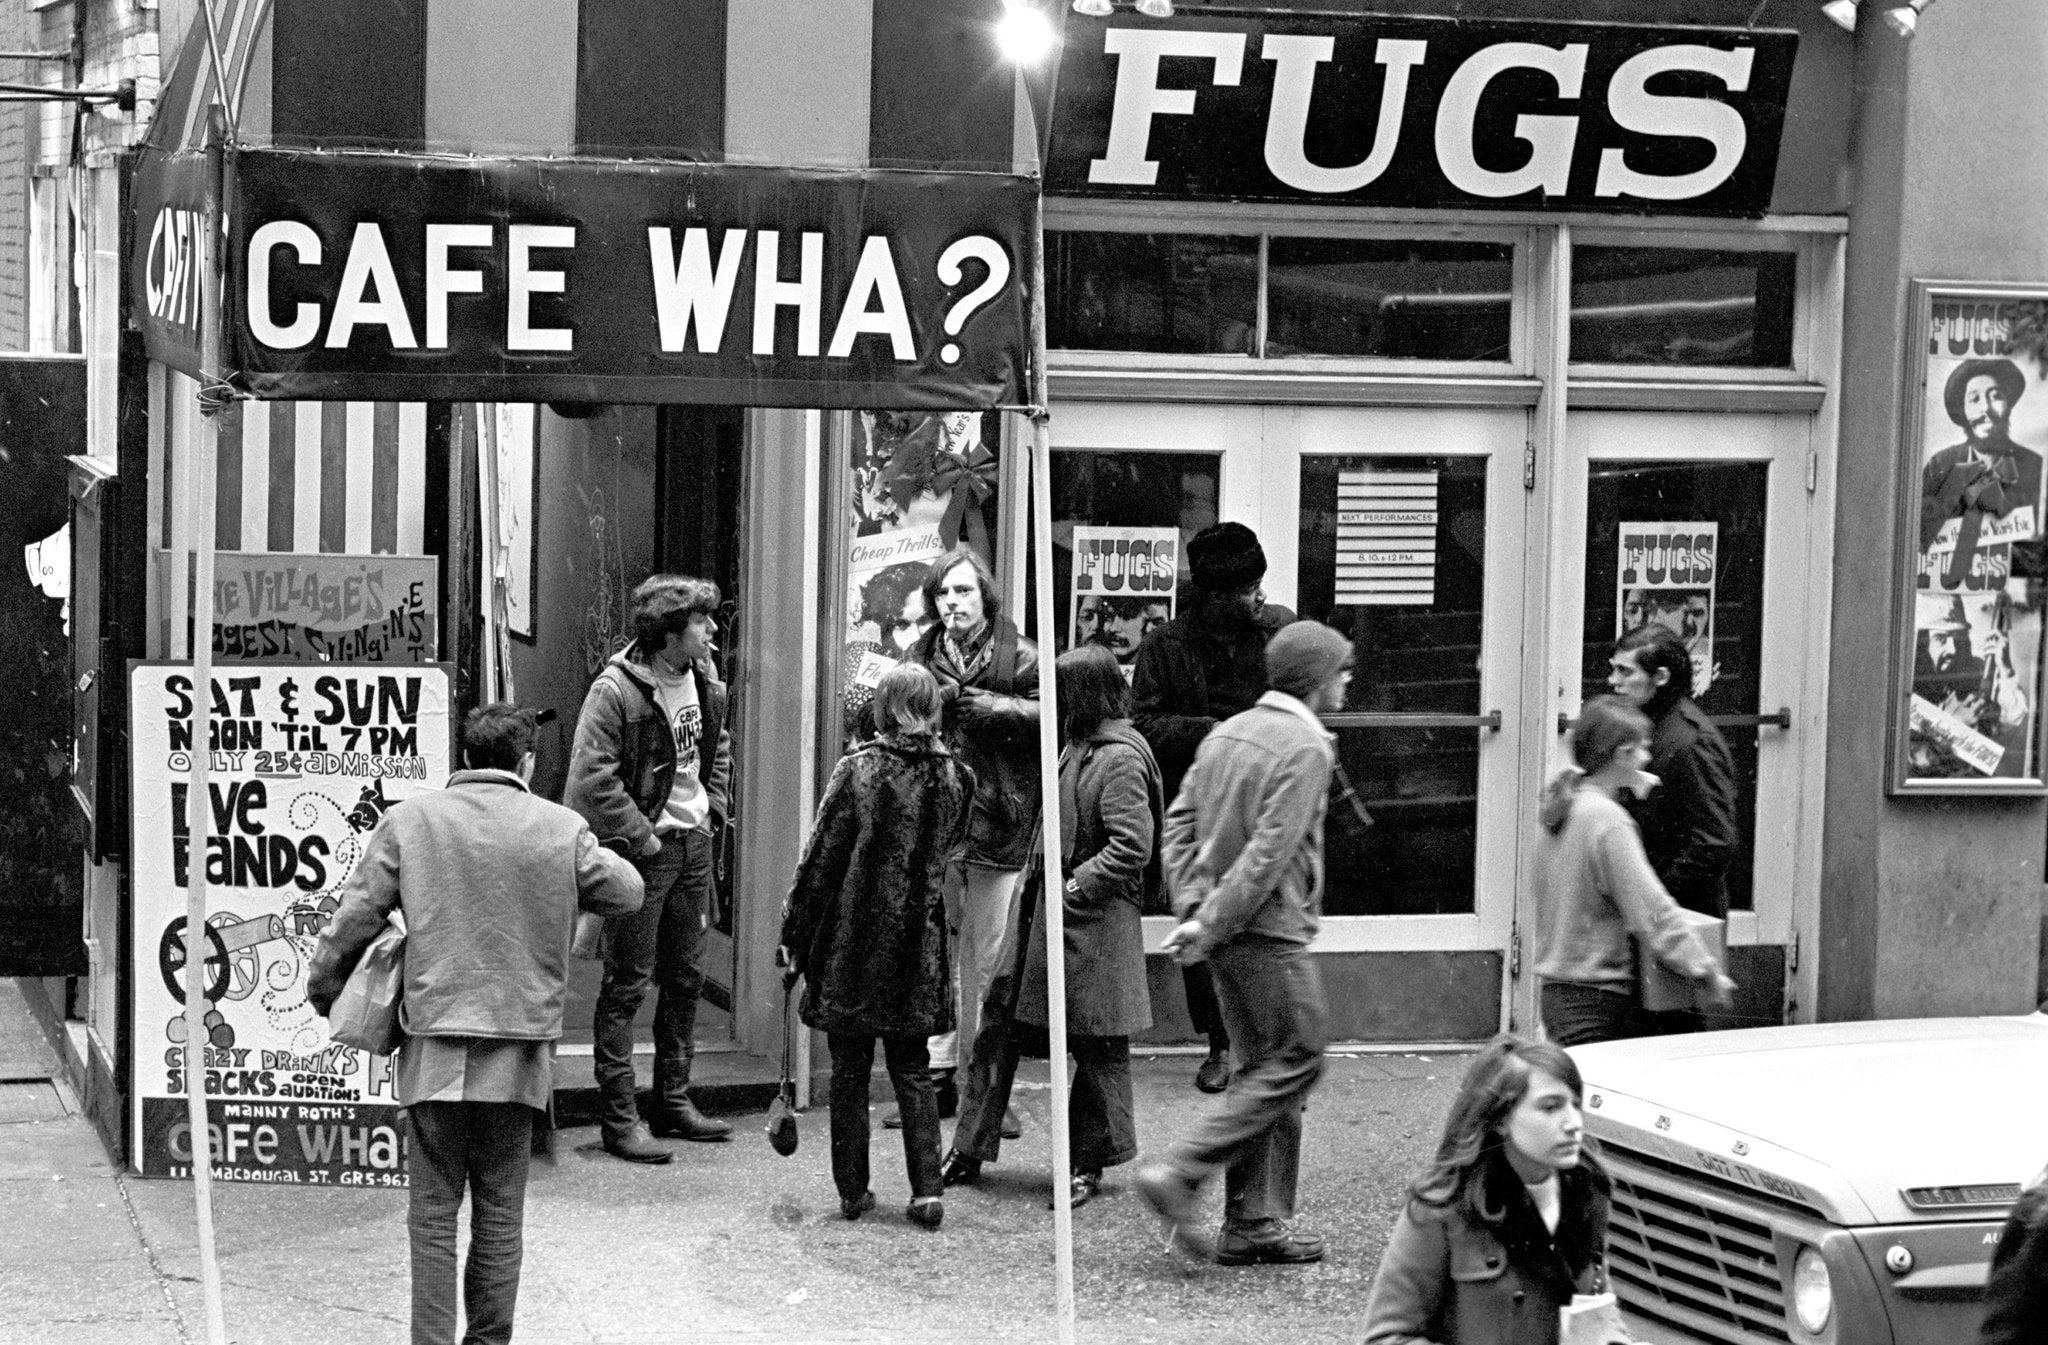 The Cafe Wha?